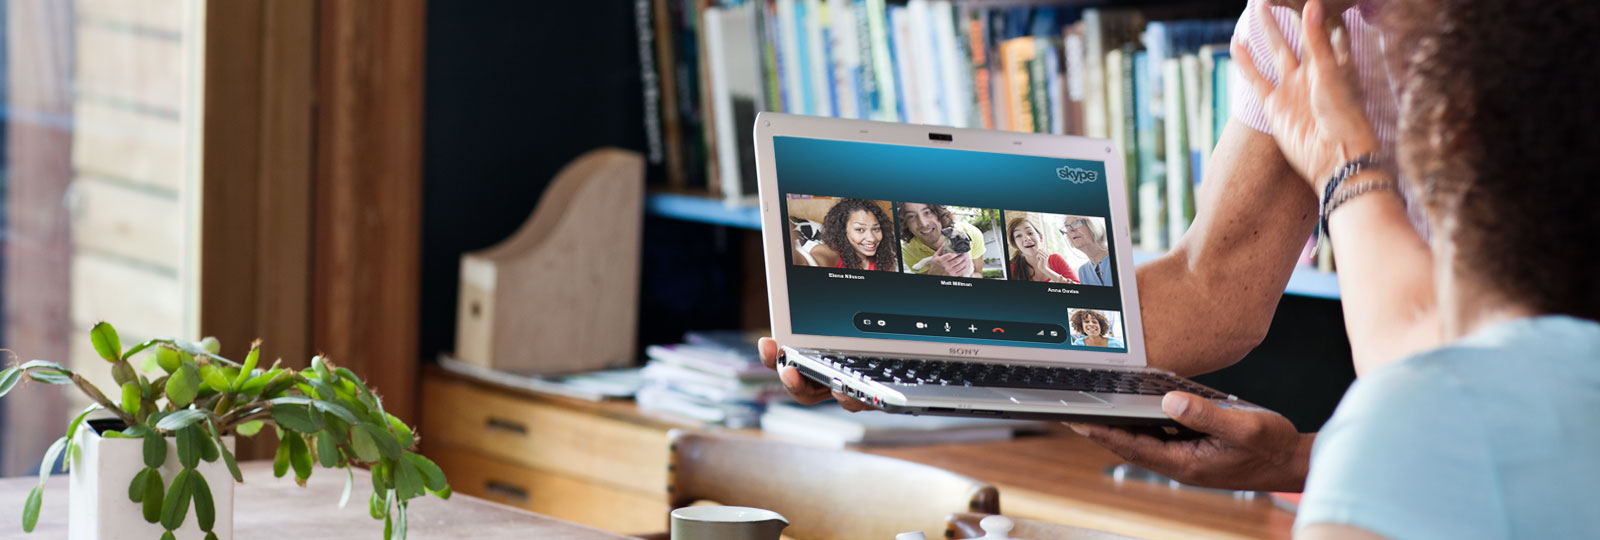 Share the love with a month of free group video on Skype.